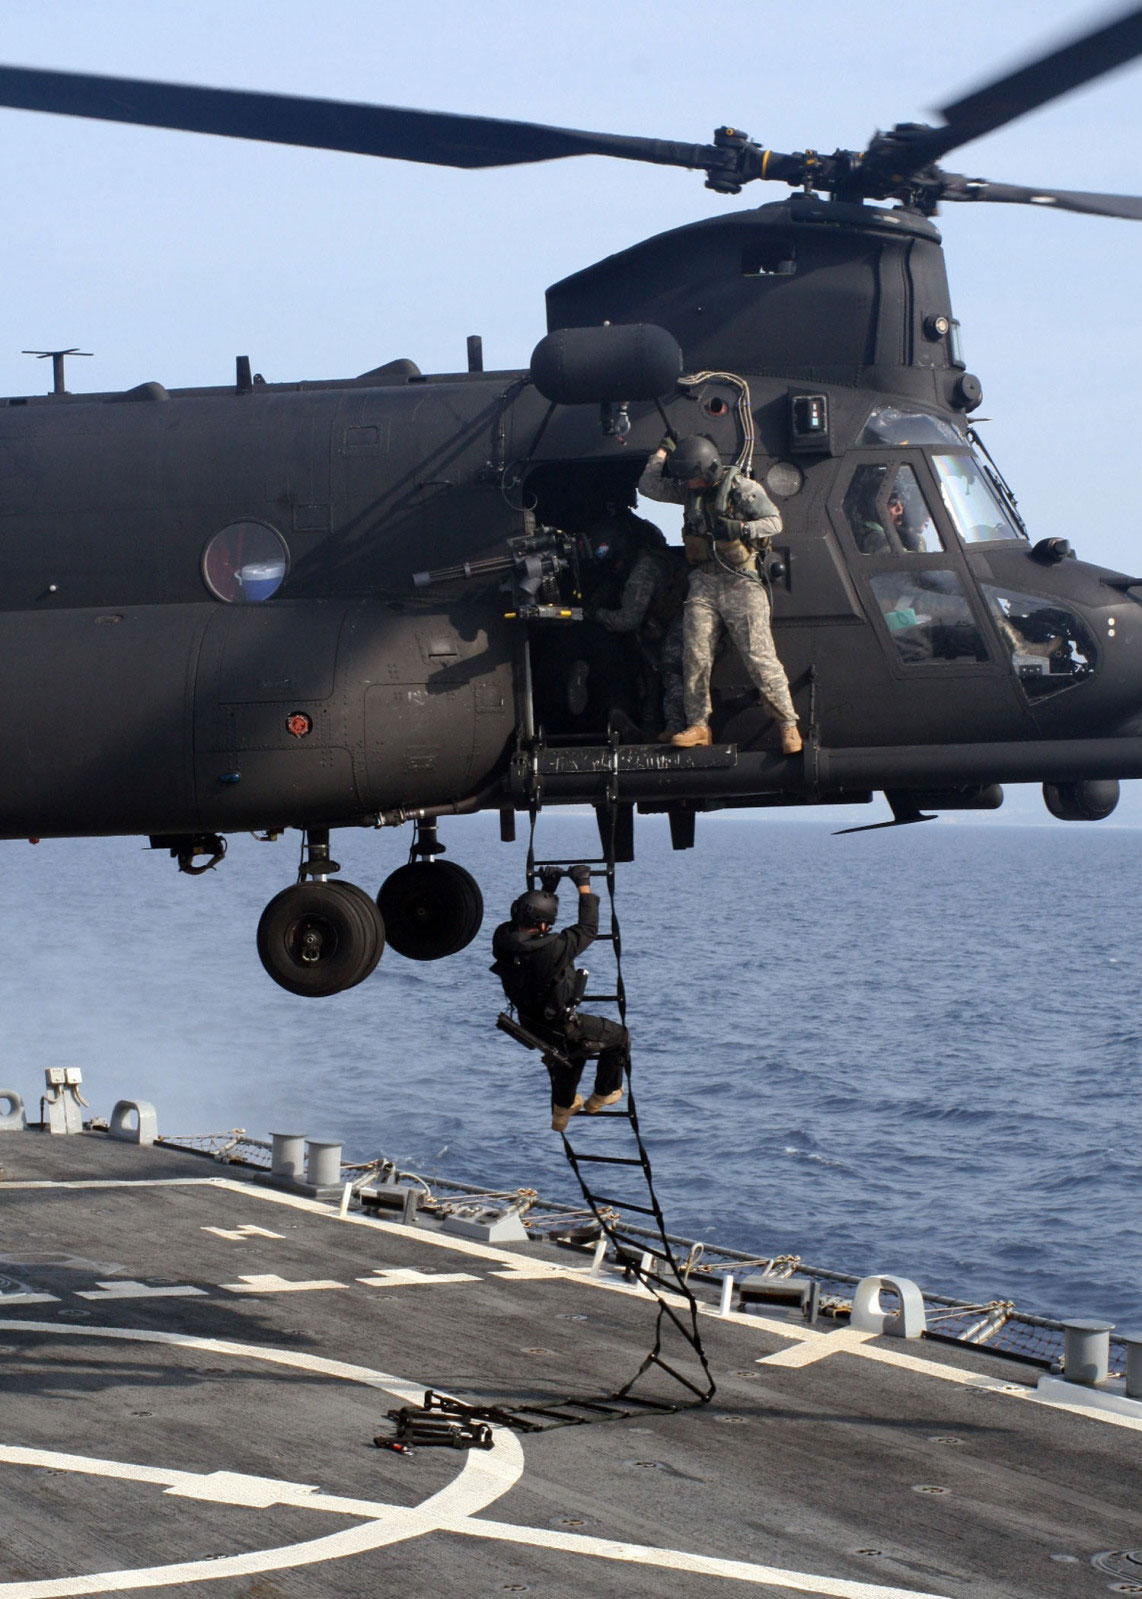 MH-47 Helicopter | Ladder